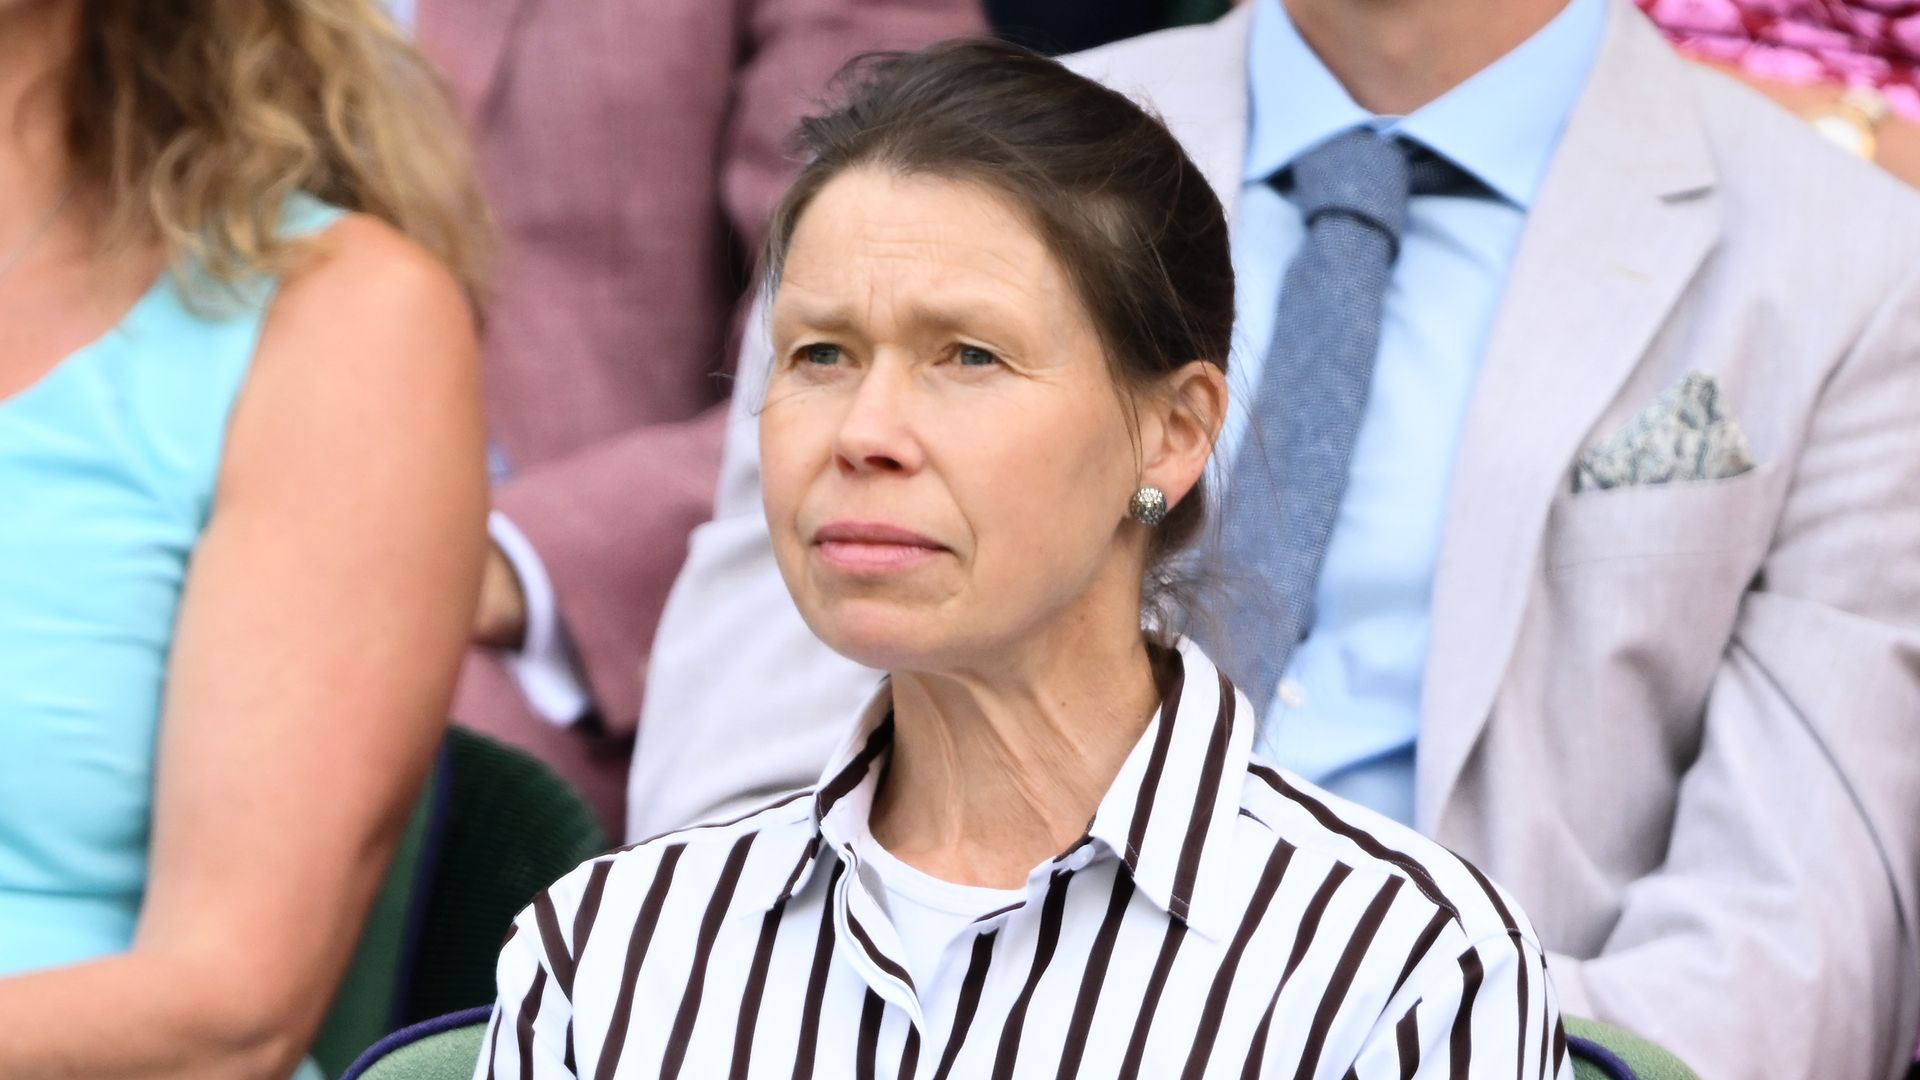  Lady Sarah Chatto attends day nine of the Wimbledon Tennis Championships